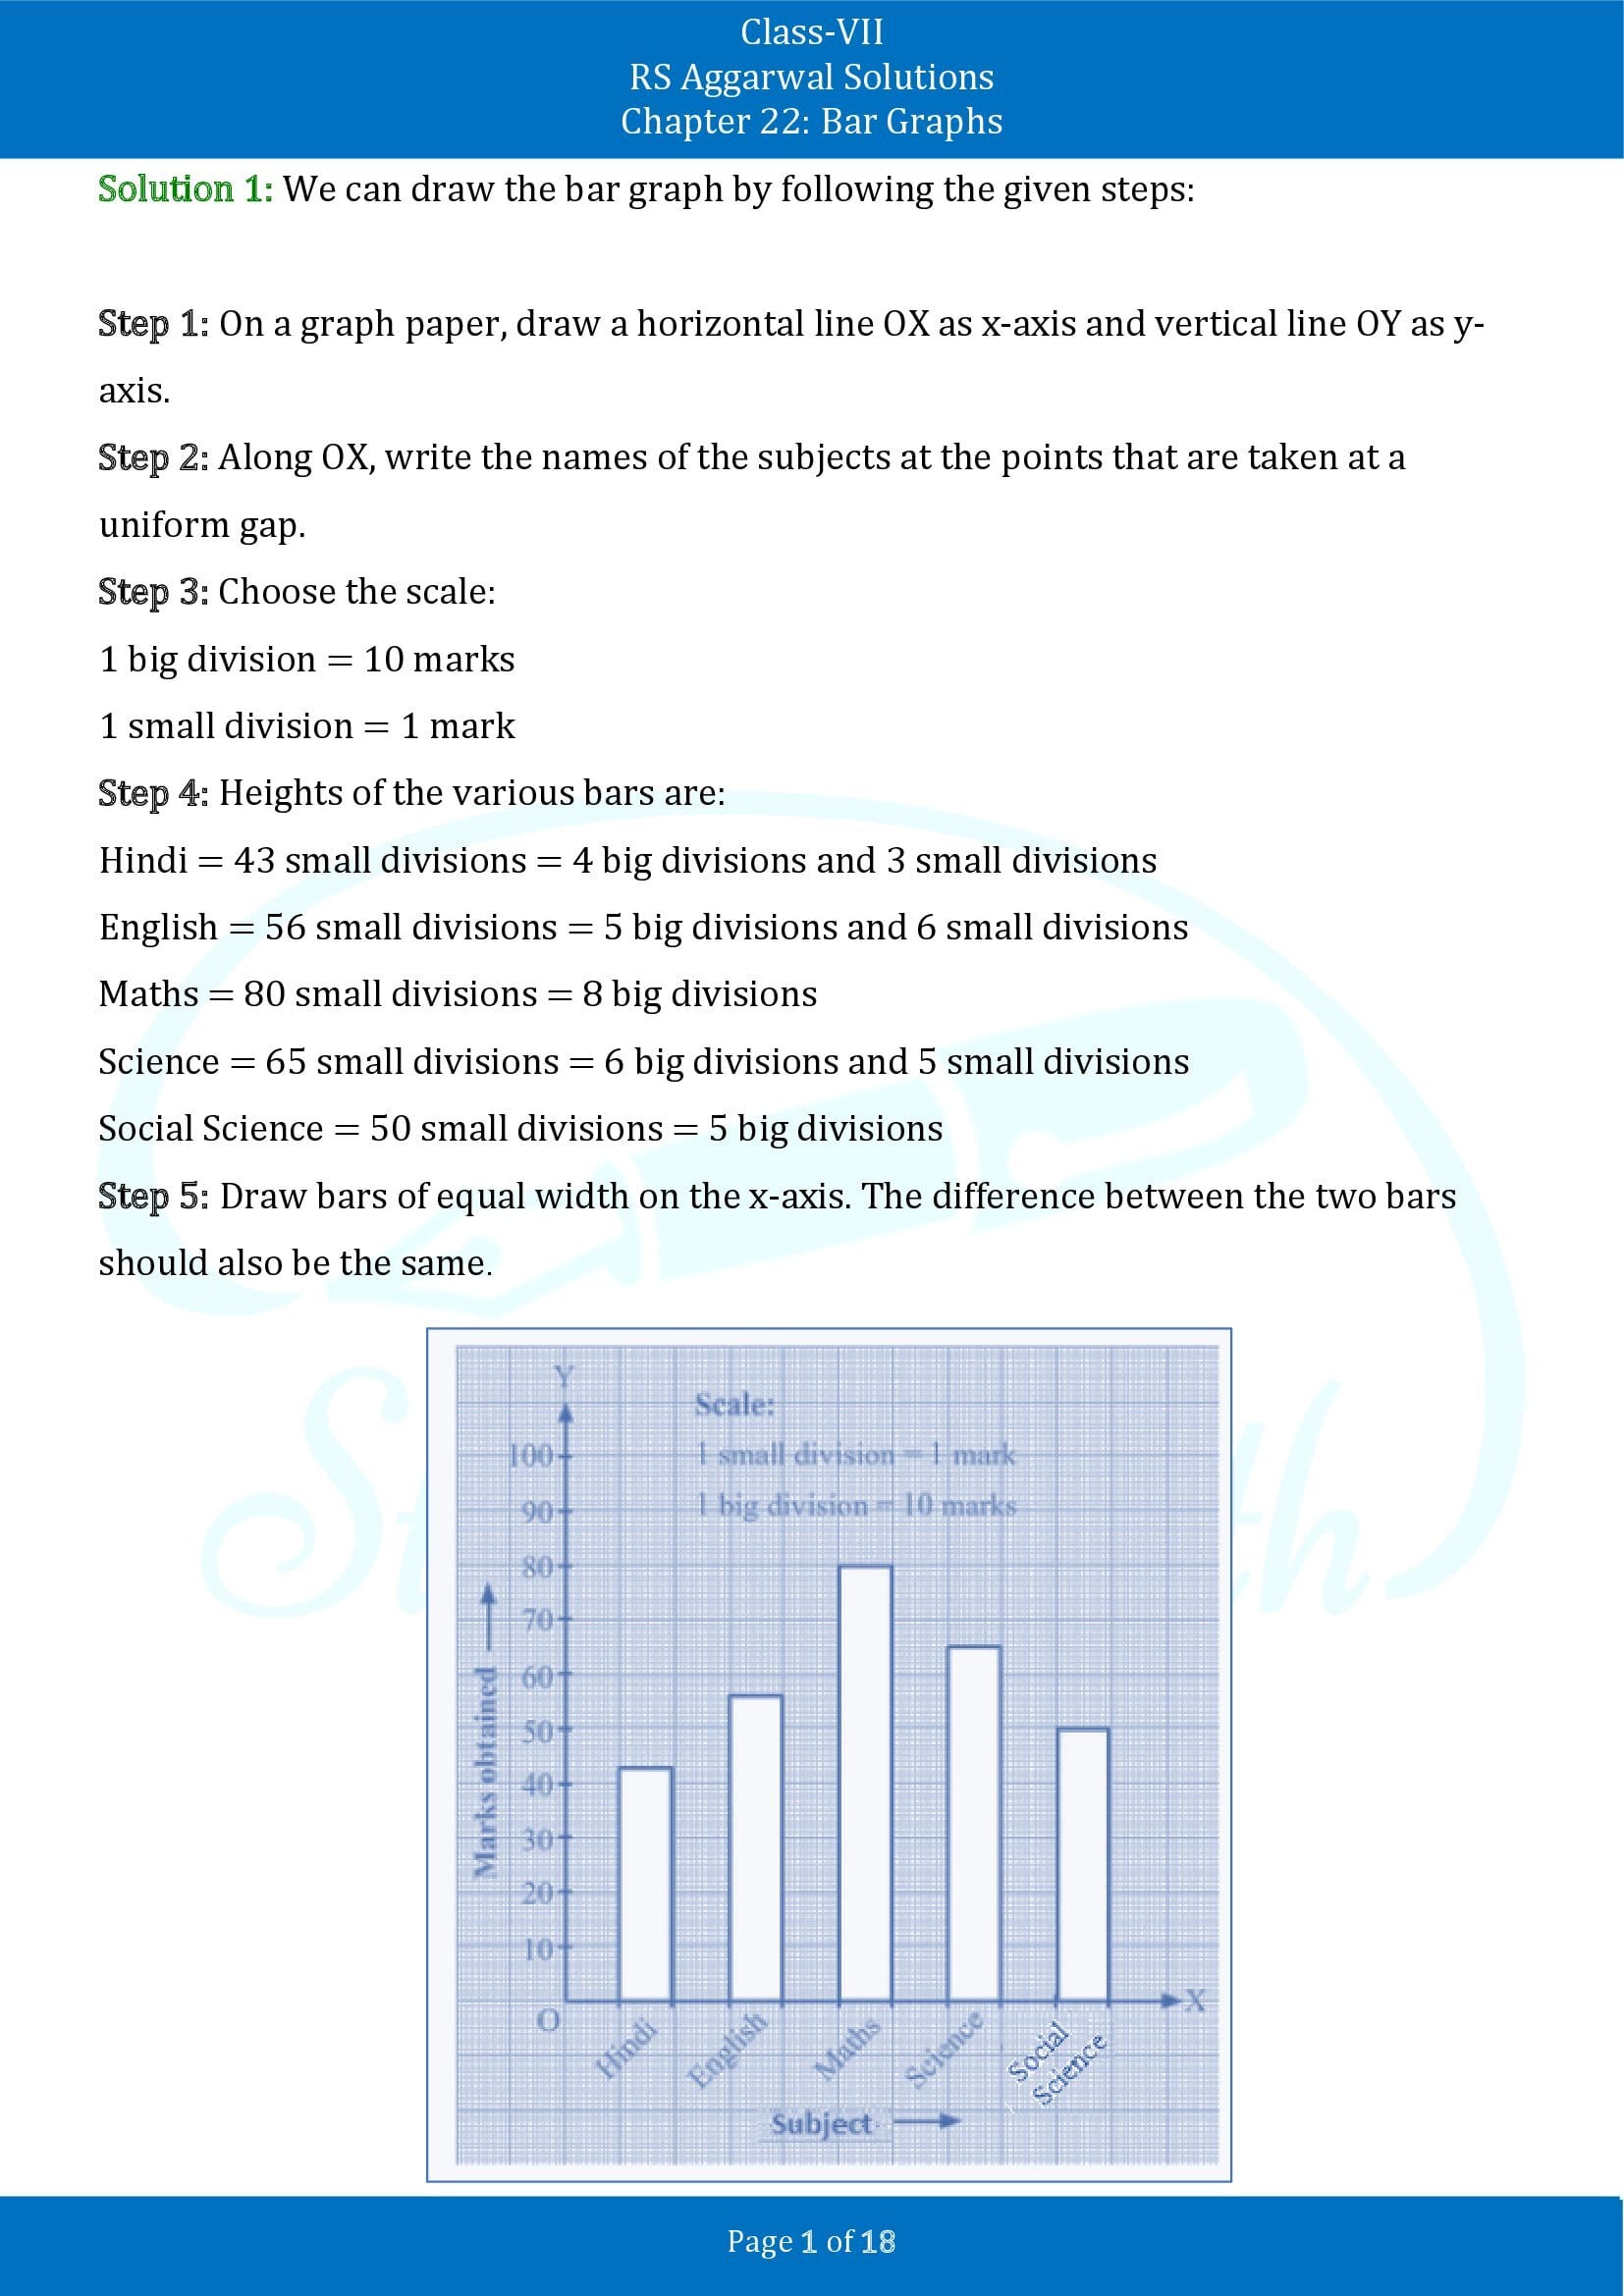 RS Aggarwal Solutions Class 7 Chapter 22 Bar Graphs 00001